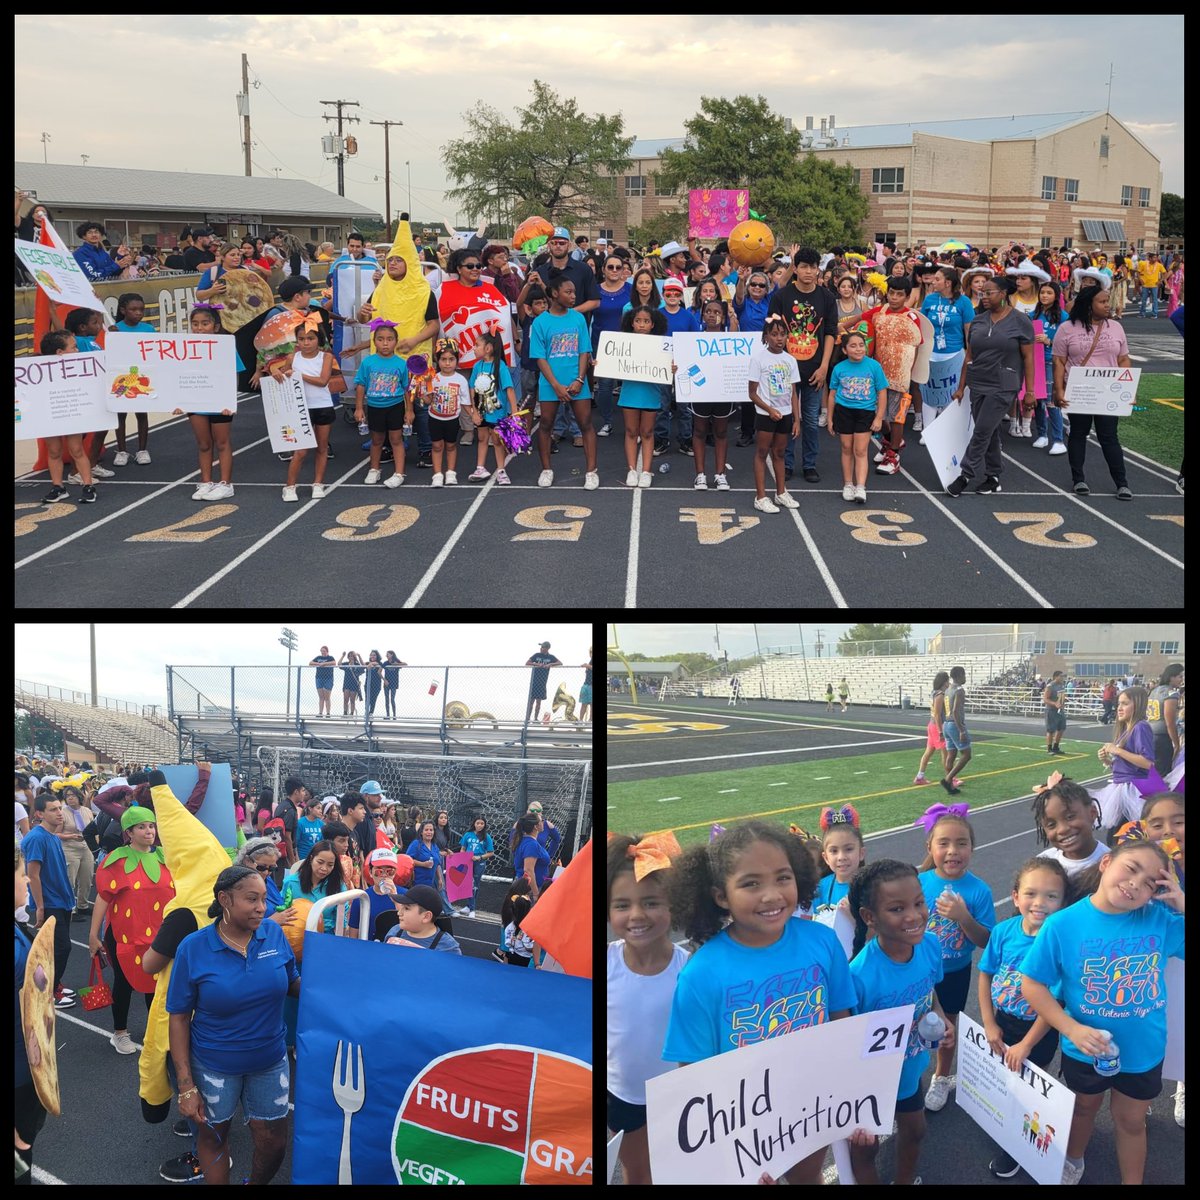 So proud of our Child Nutrition team representin' at the ECHS Homecoming Pep Rally or Parade. Always a good time when the district comes together. #ECproud #UnityIsStrength